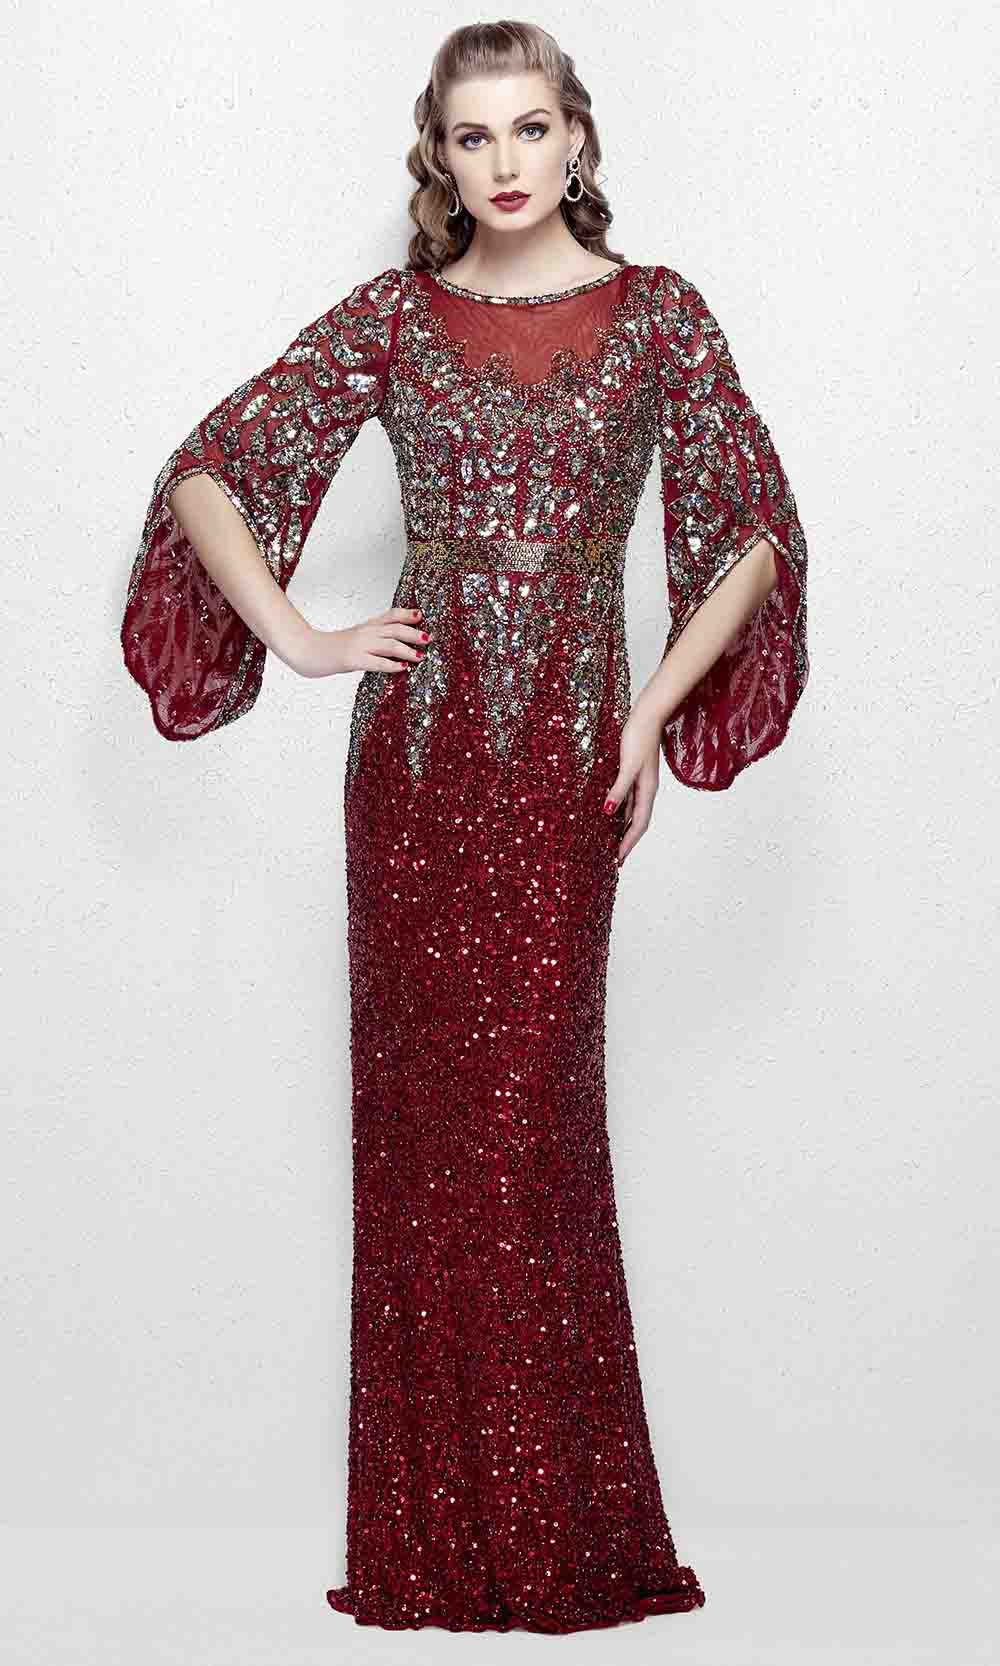 Primavera Couture - Stunning Two-Tone Sequin Embellished Long Gown with Batwing Sleeves 1424
